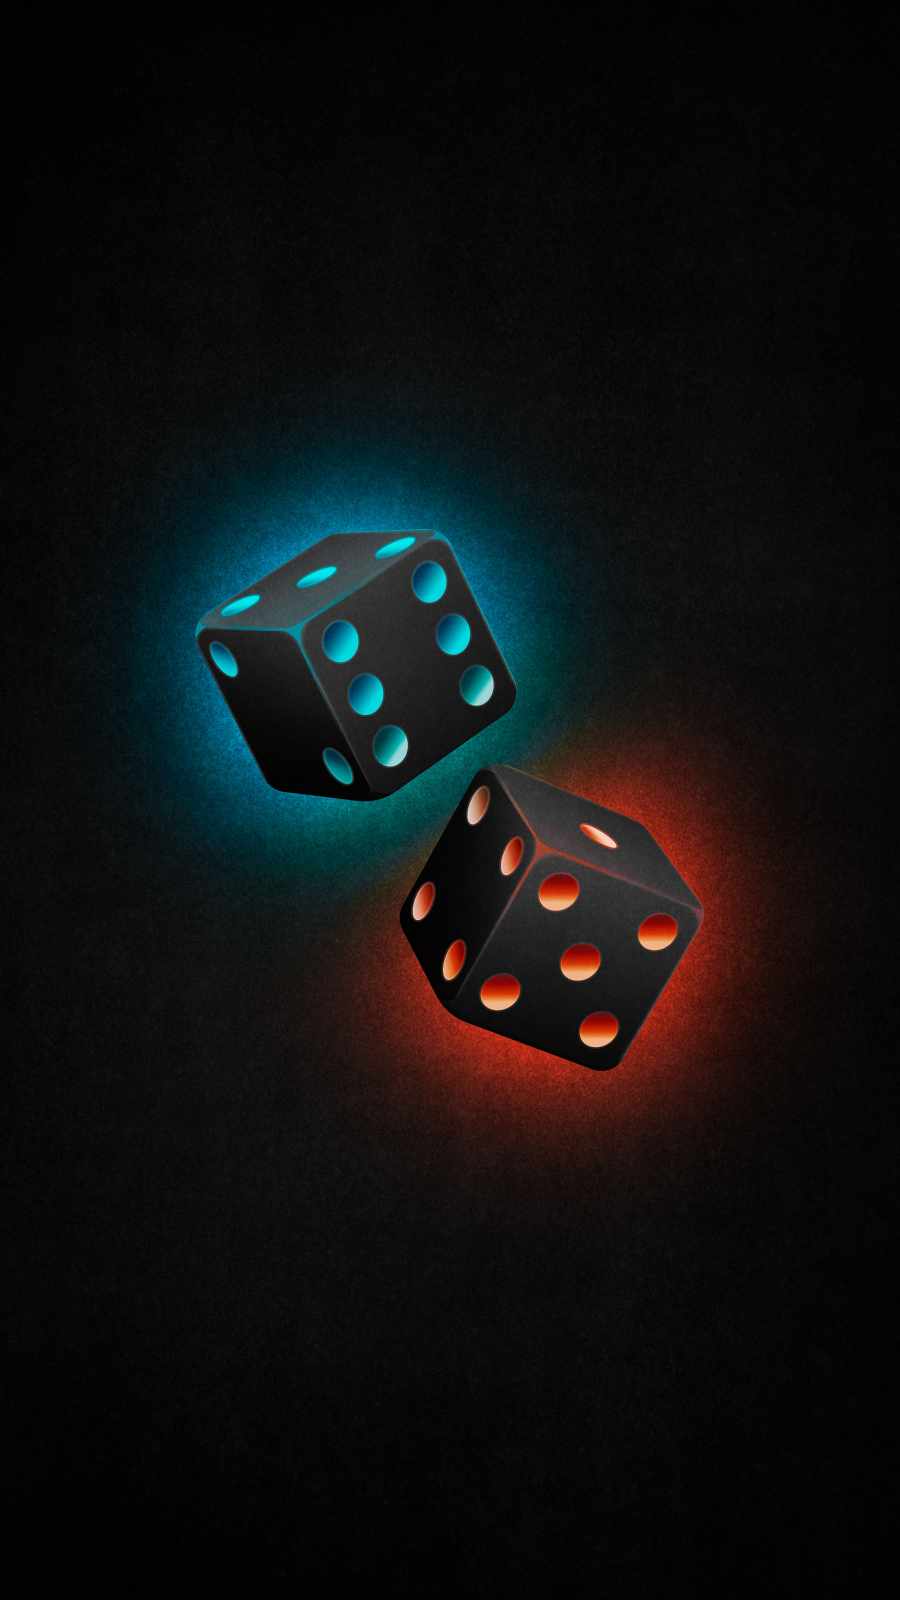 Dice wallpaper wallpaper by KinG_BackGrounD - Download on ZEDGE™ | f38d